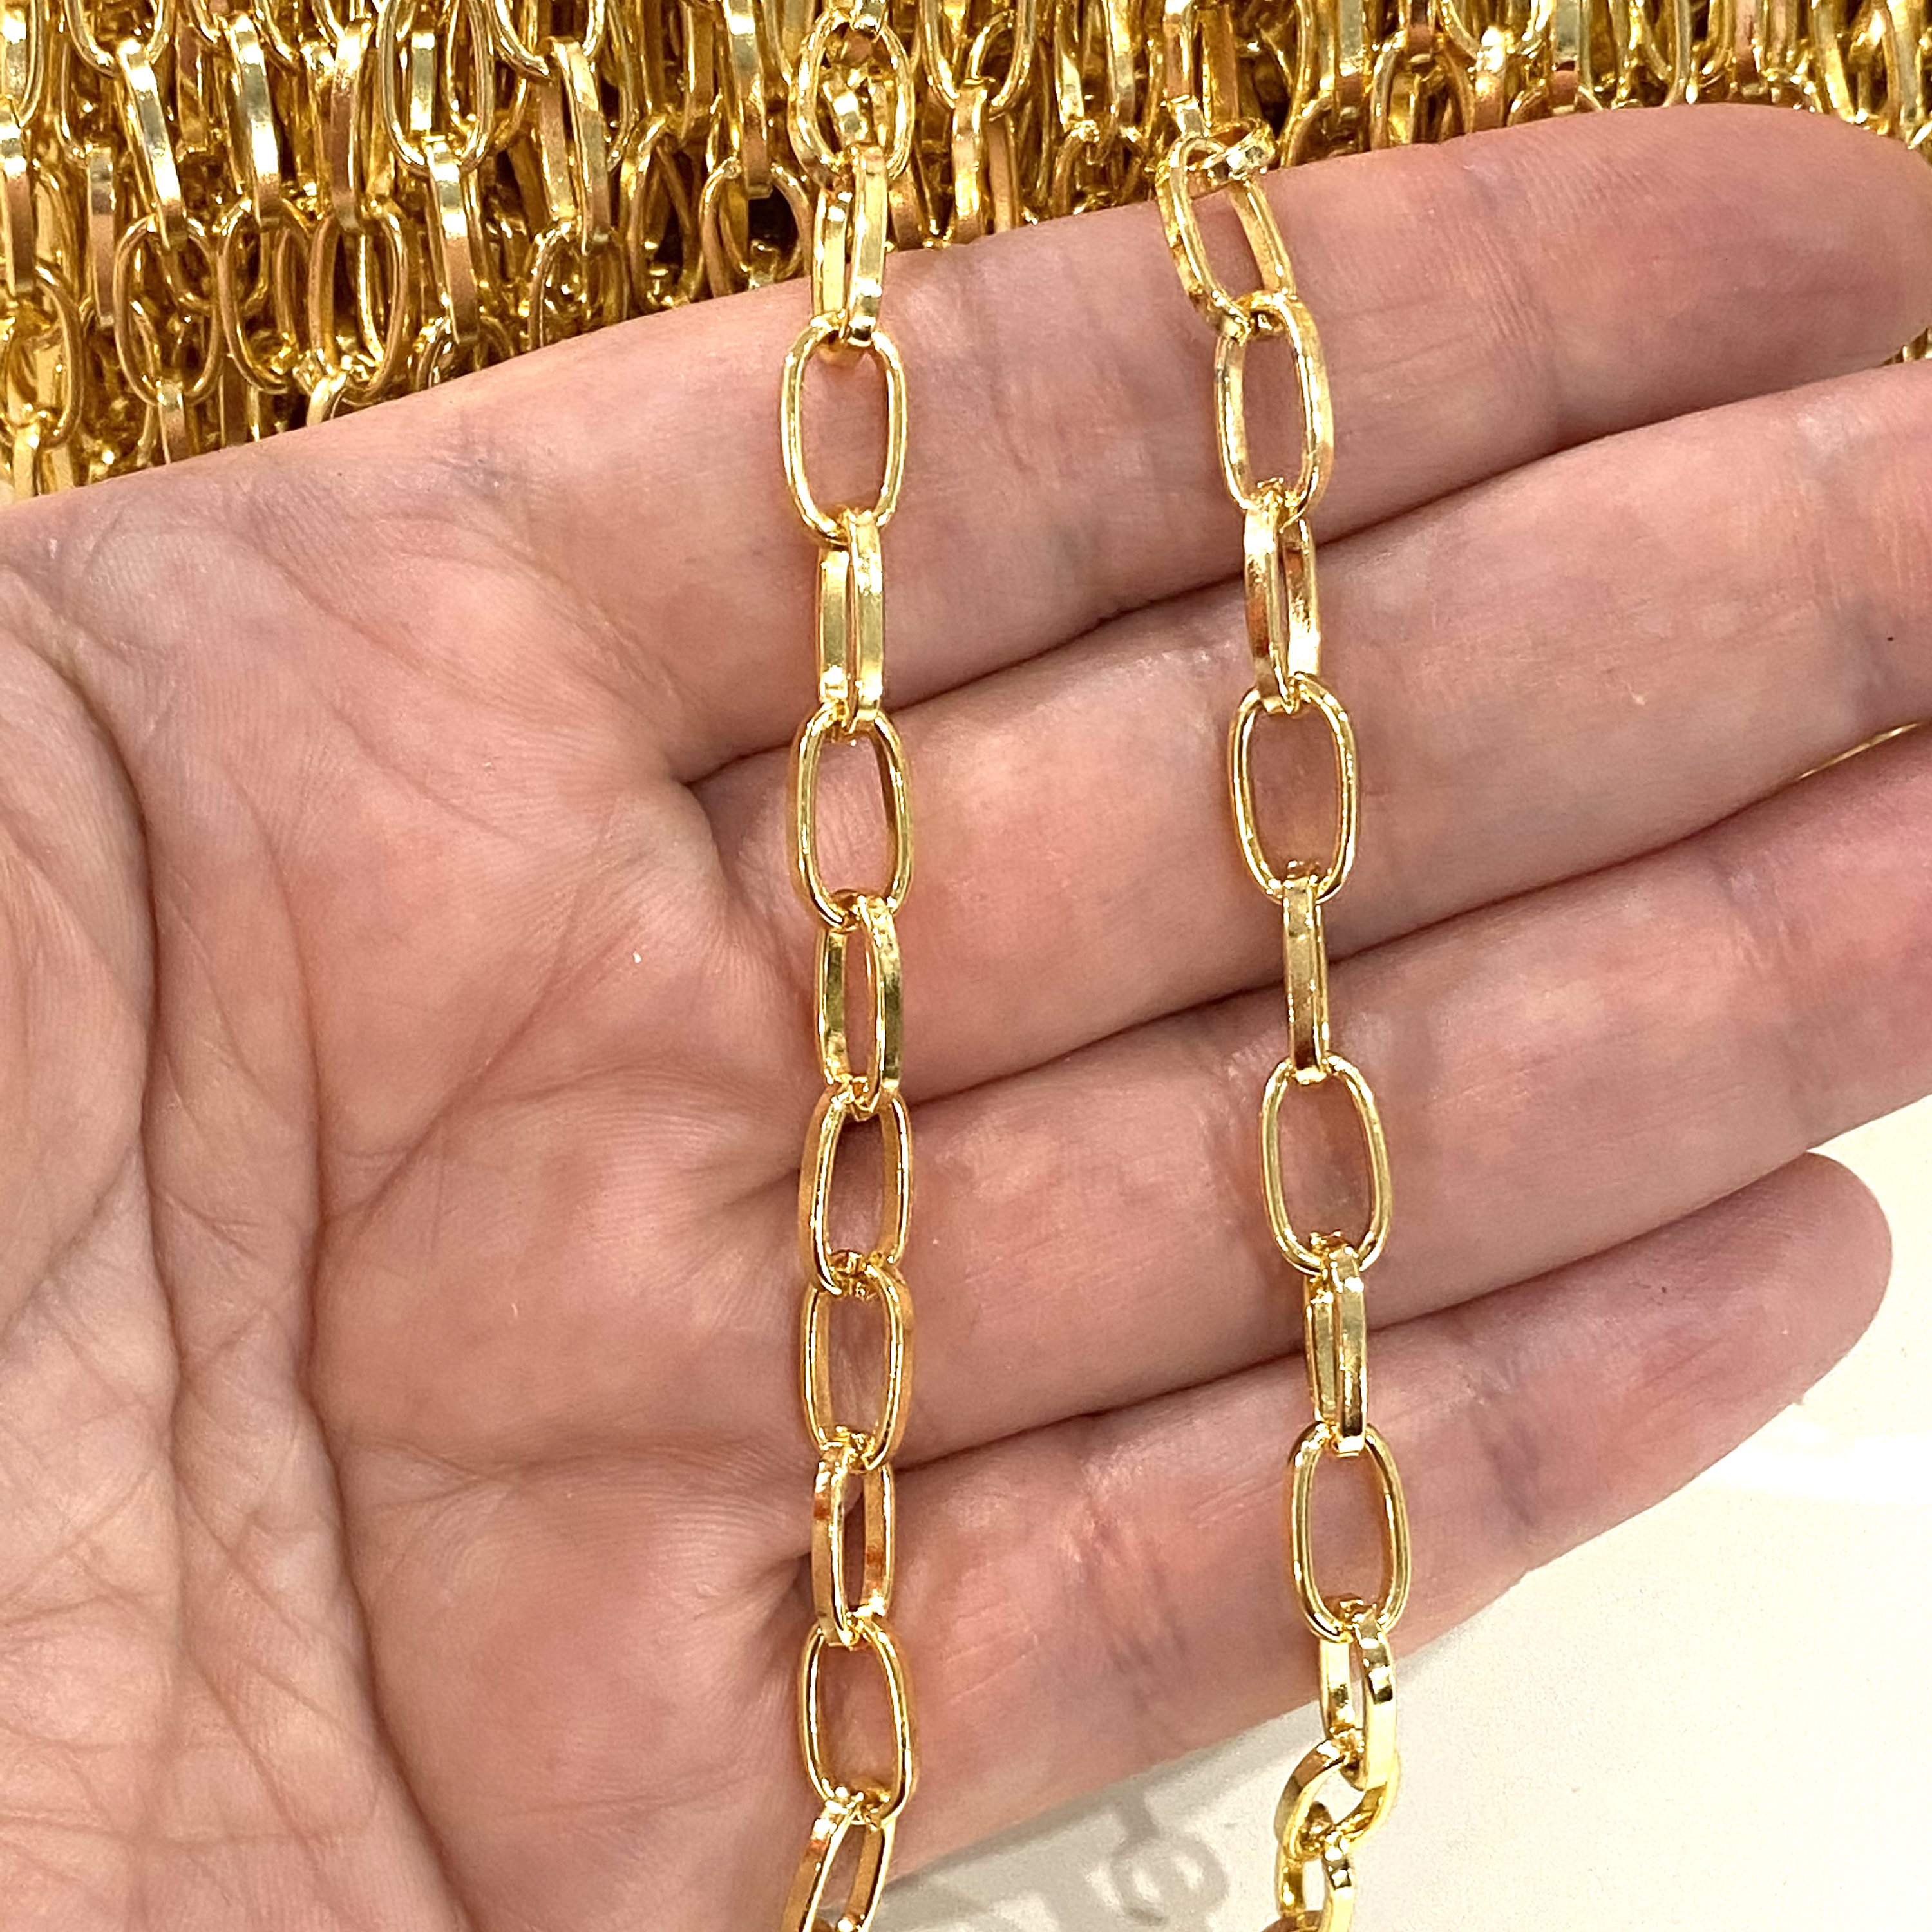 24kt Shiny Gold Plated Chain, 2mm Gold Chain With 3.5 Mm Balls